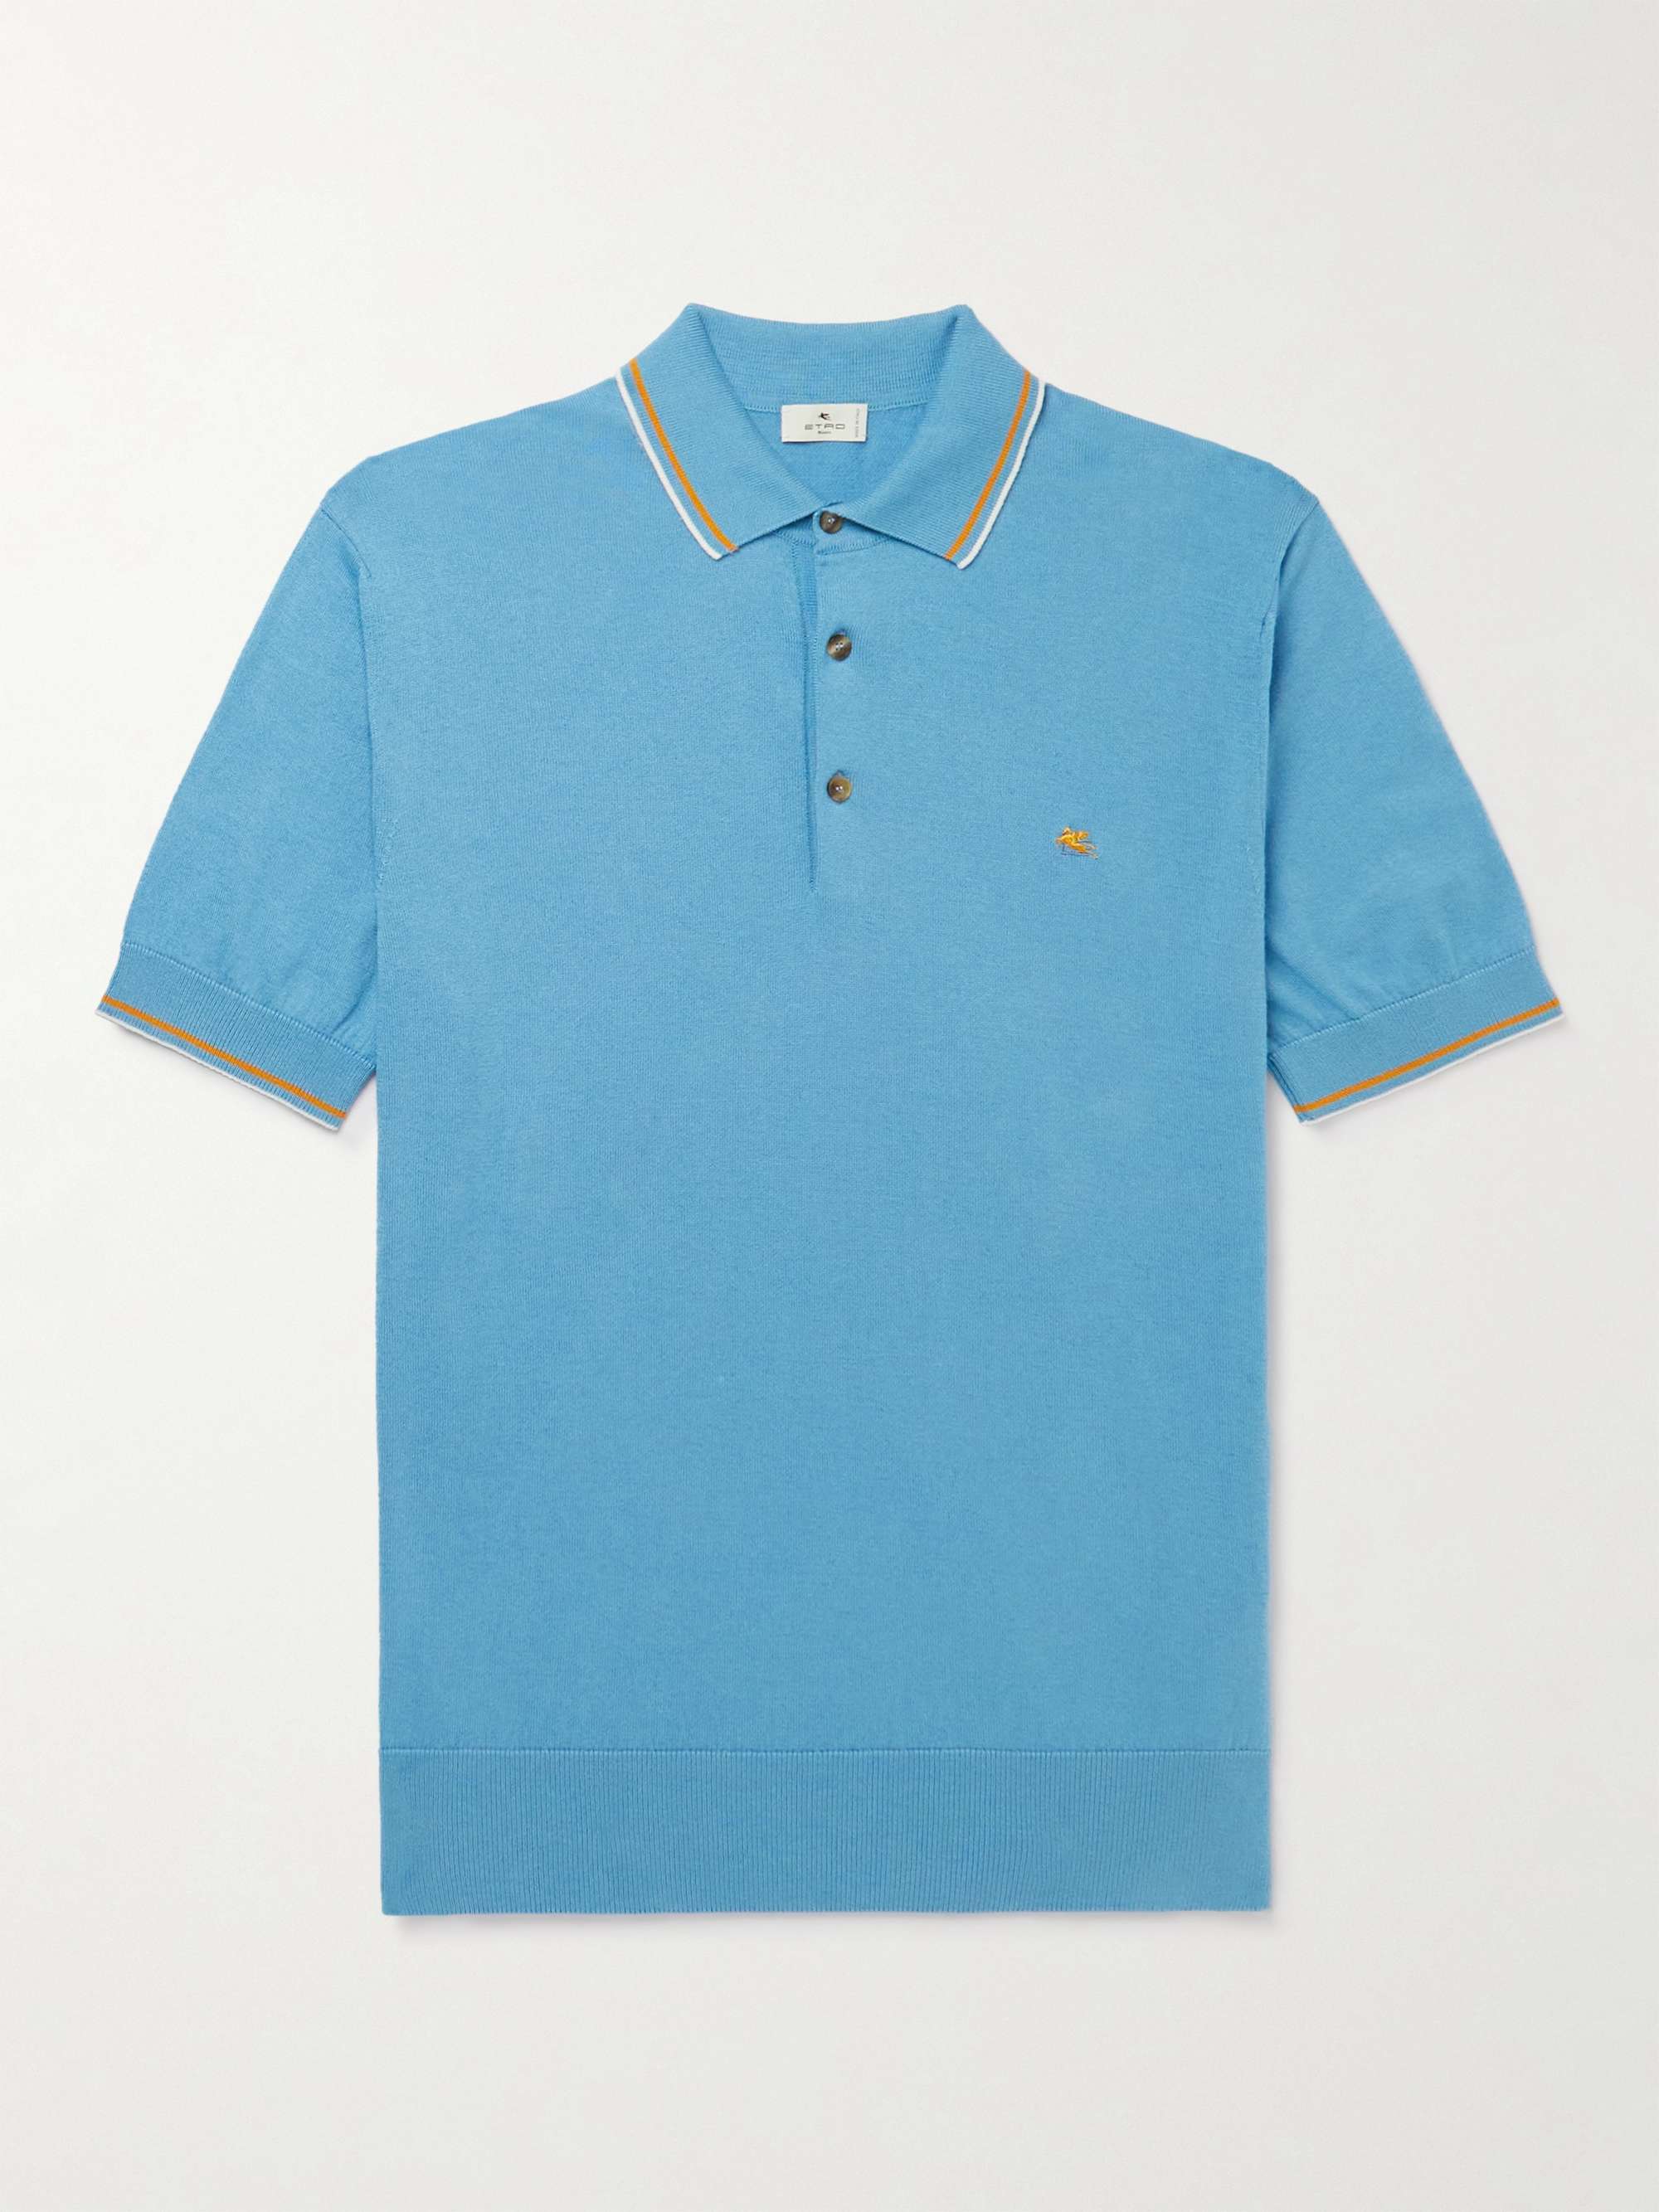 ETRO Slim-Fit Logo-Embroidered Cotton and Cashmere-Blend Polo Shirt